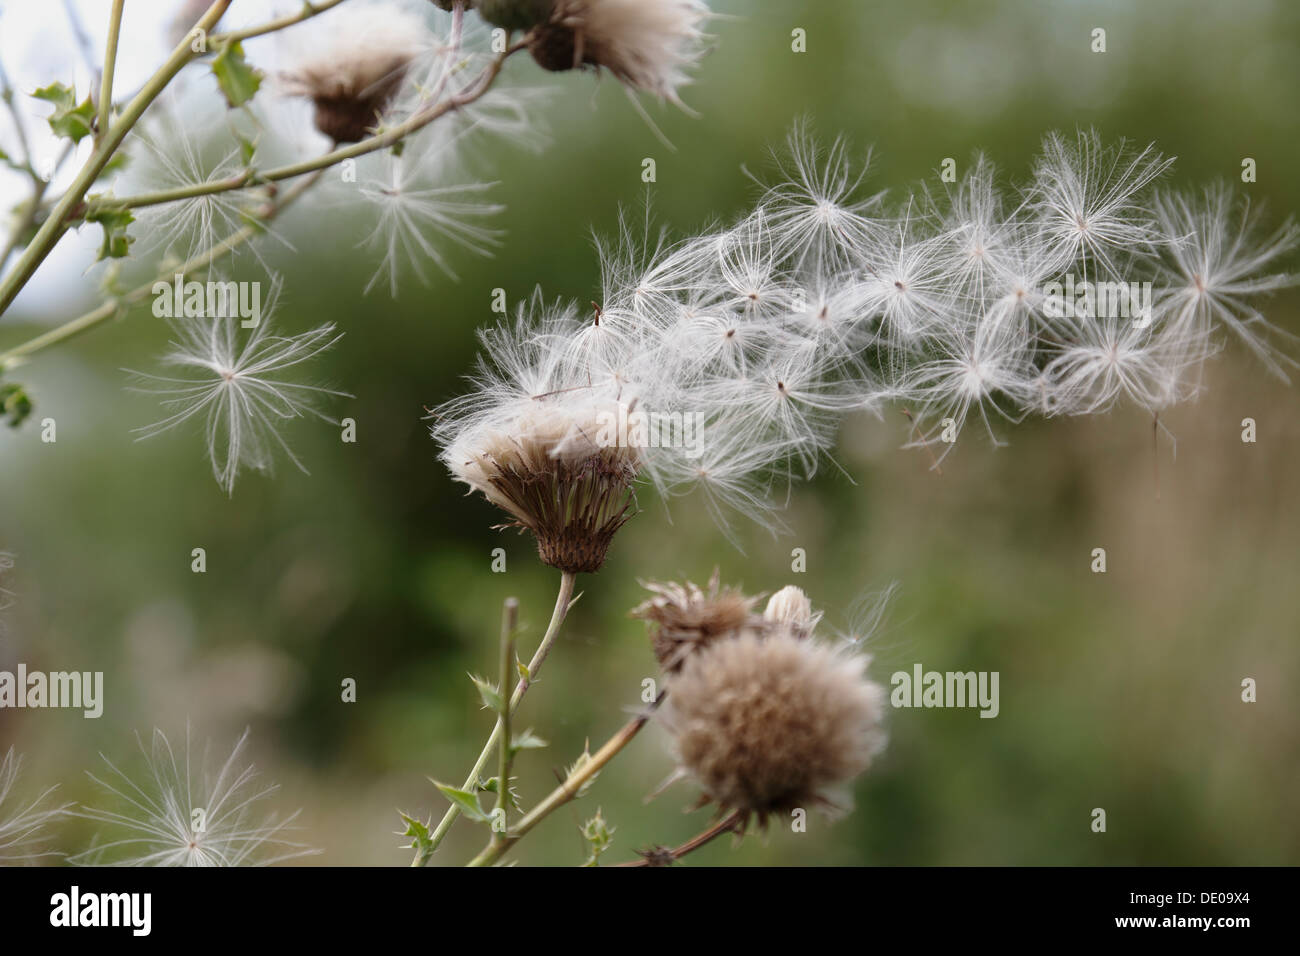 Wild flower seeds blowing in the wind, Scotland, UK, Europe Stock Photo